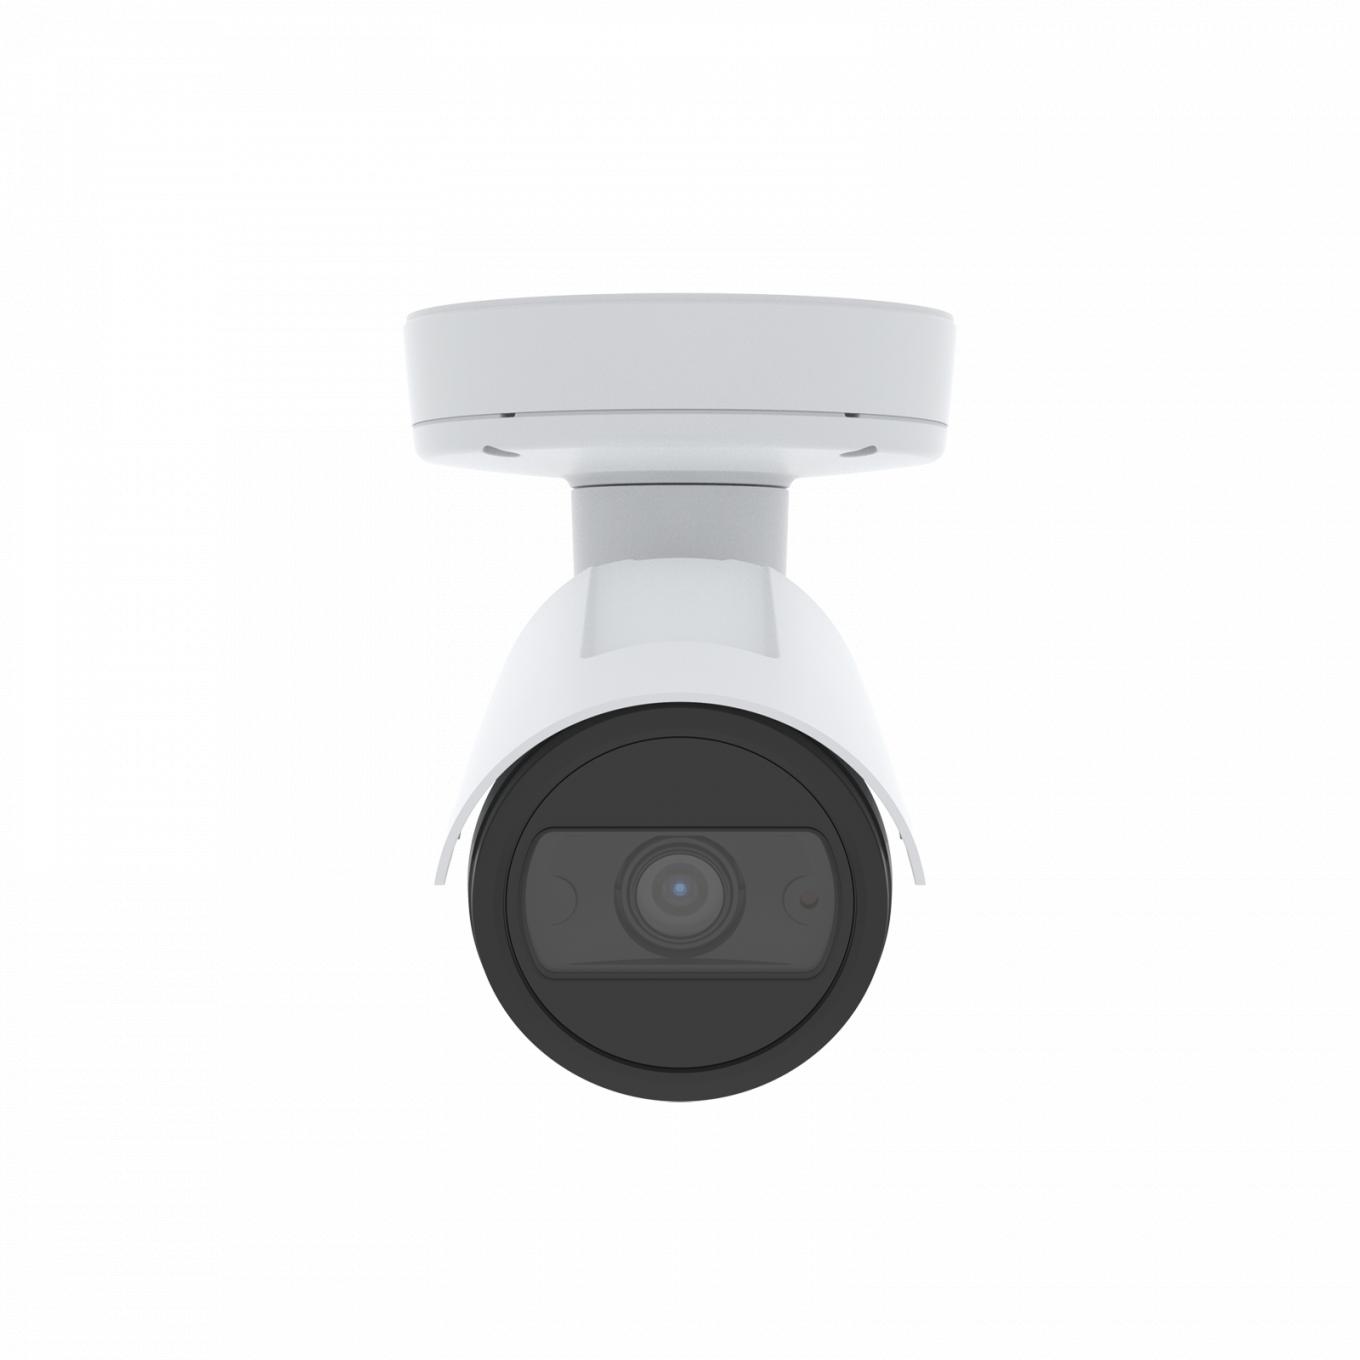 AXIS P1455-LE is an outdoor-ready fixed bullet IP camera with Lightfinder and Forensic WDR. The camera is viewed from its front.